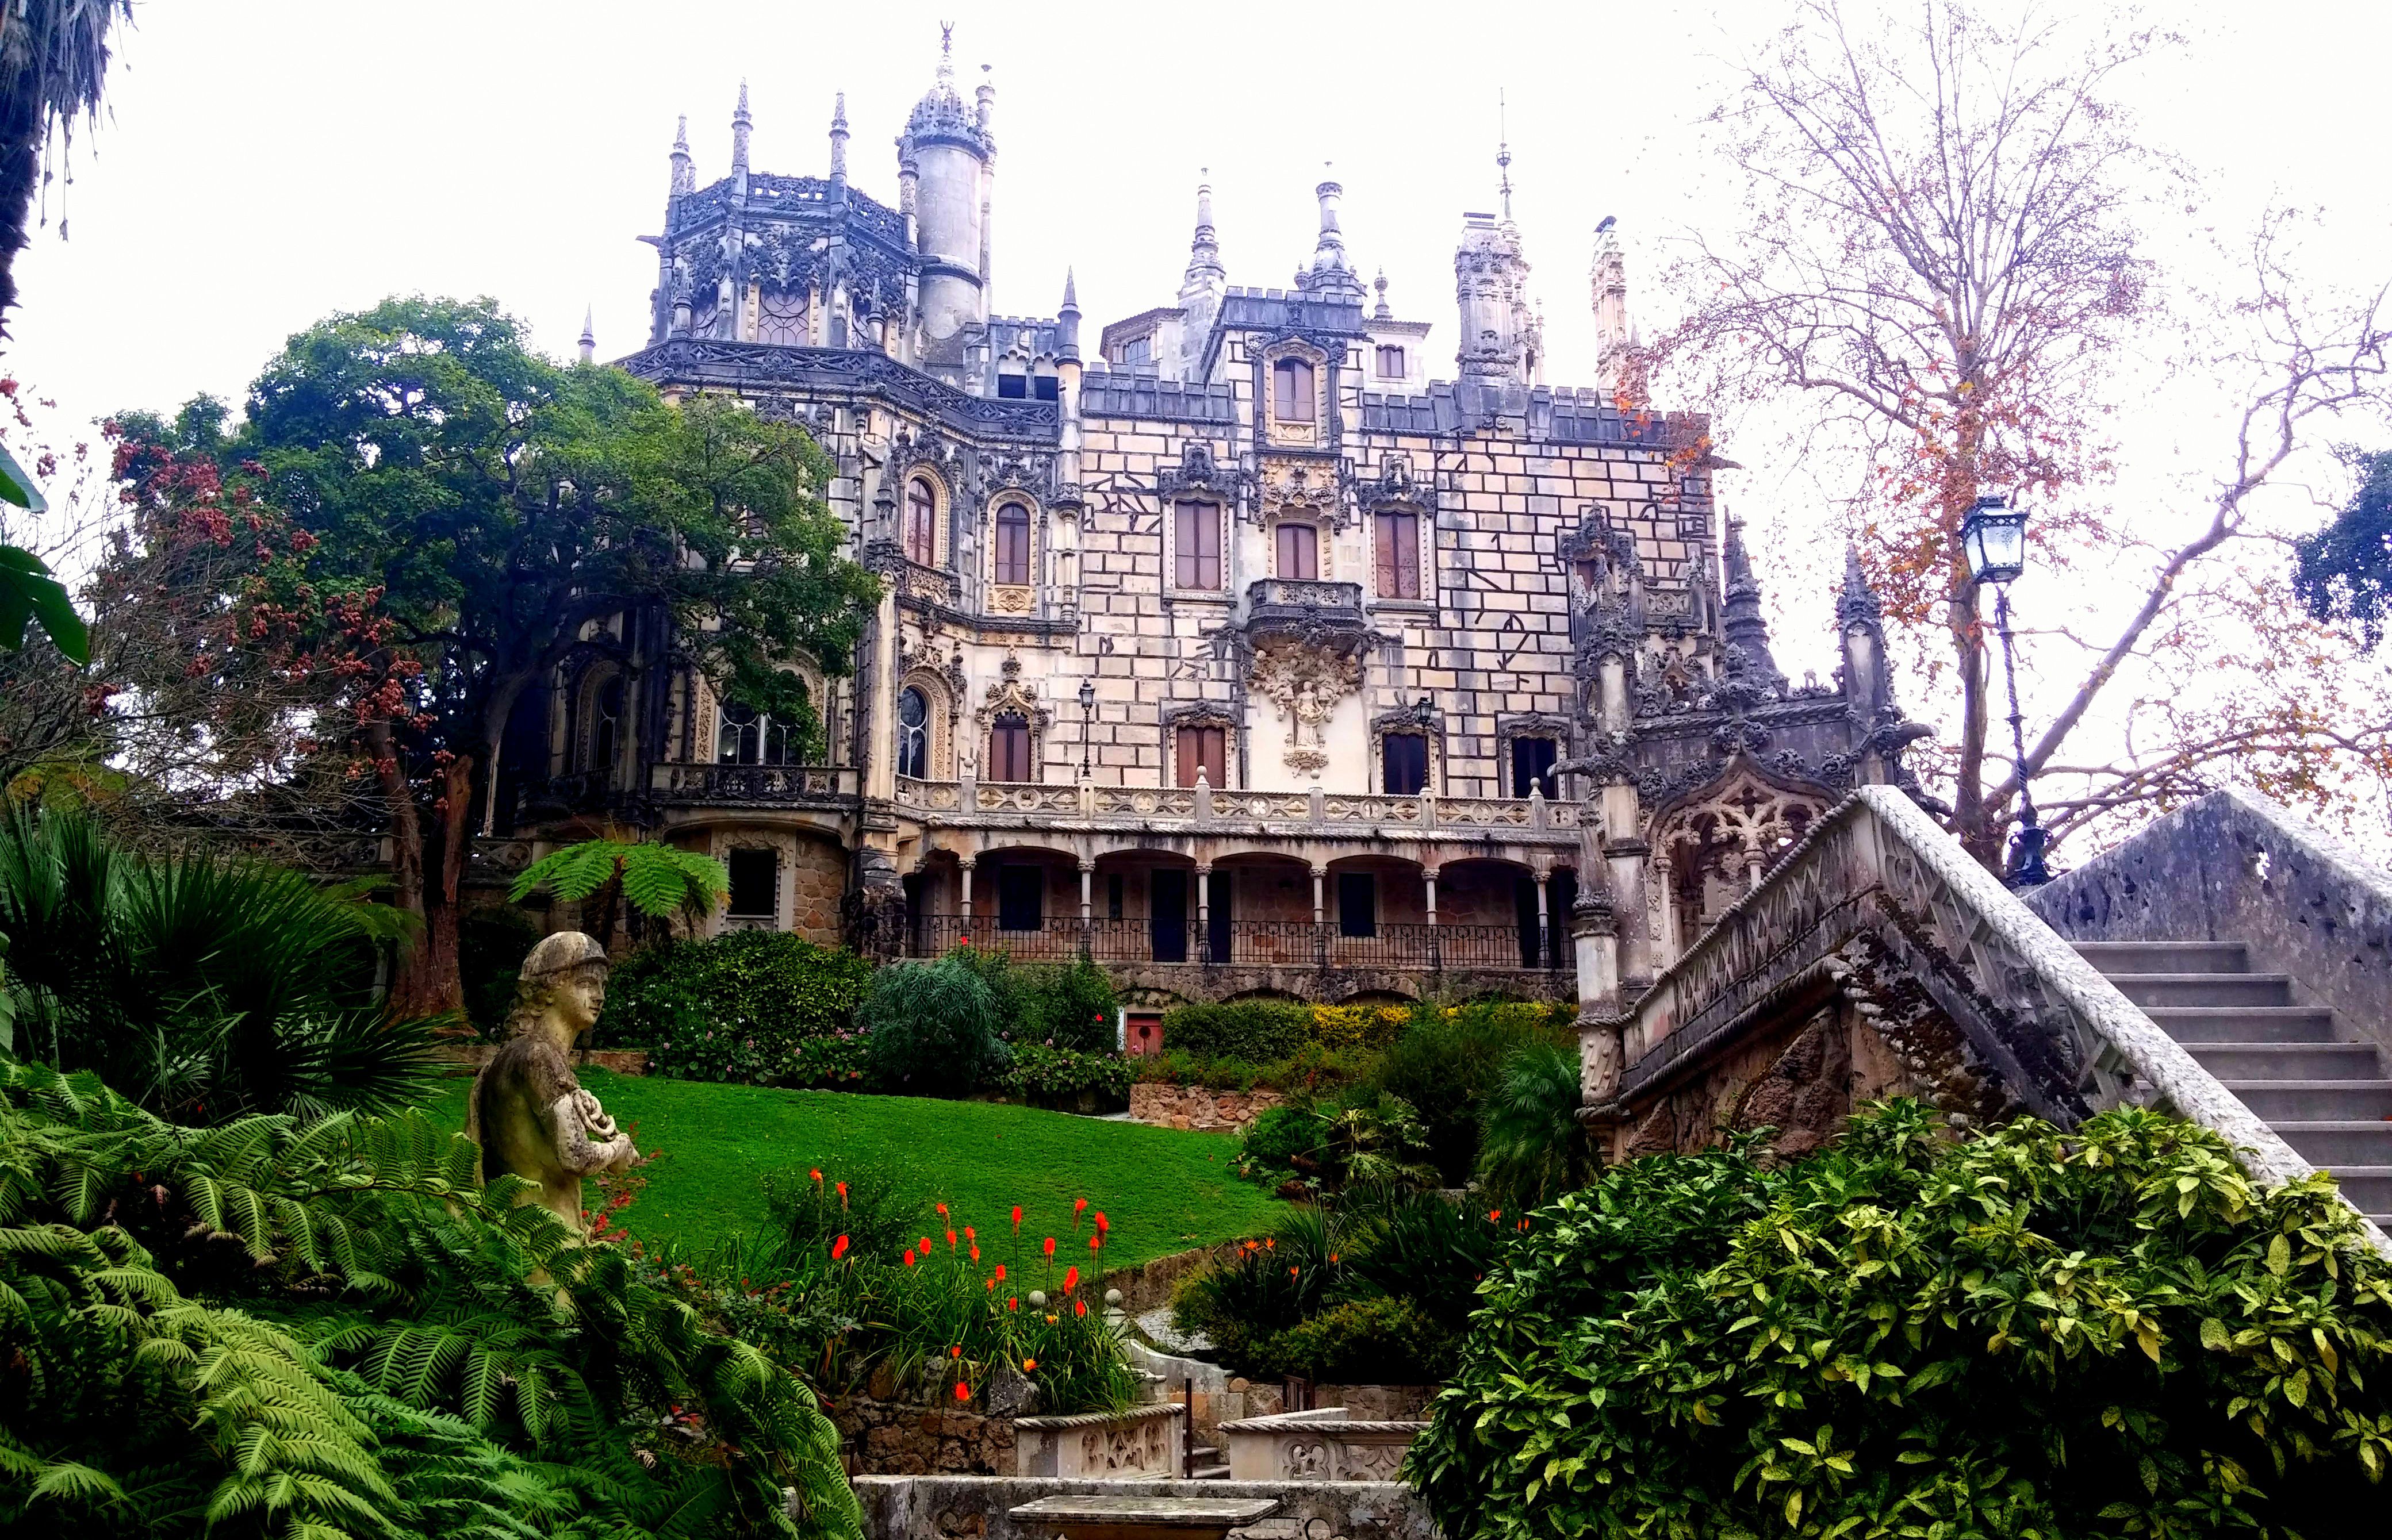 In a fairy tale: Sintra, Portugal